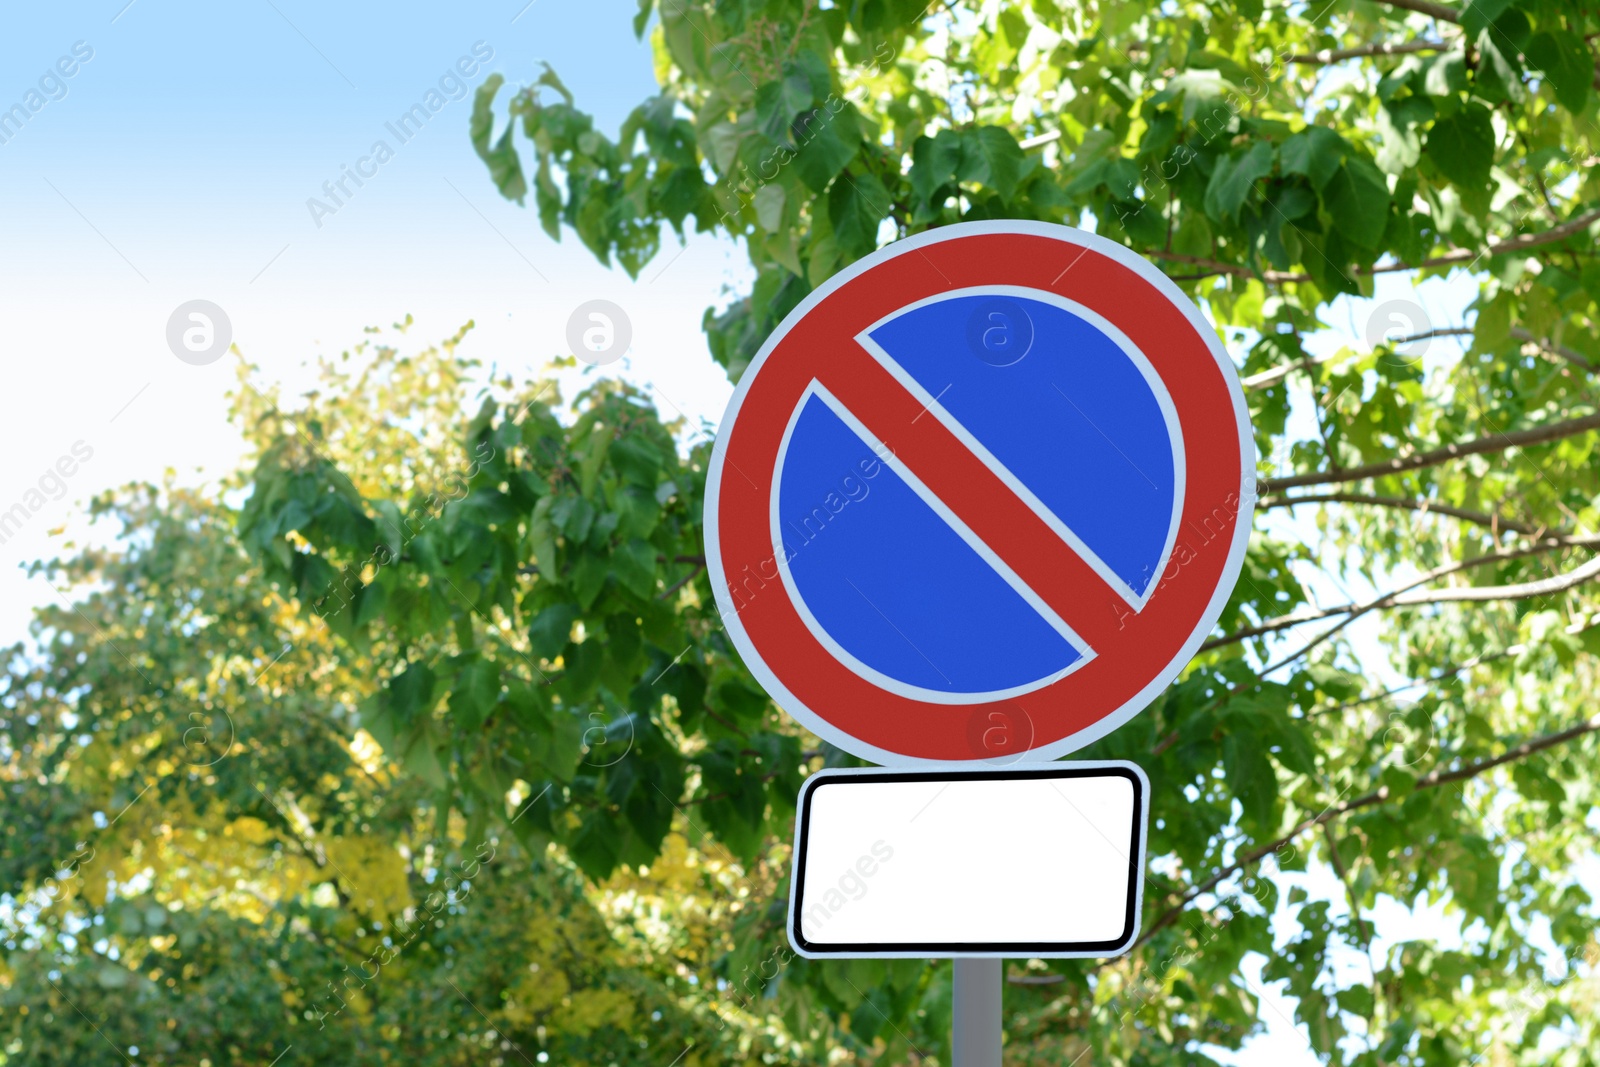 Photo of No parking road sign on city street, space for text. Traffic rules